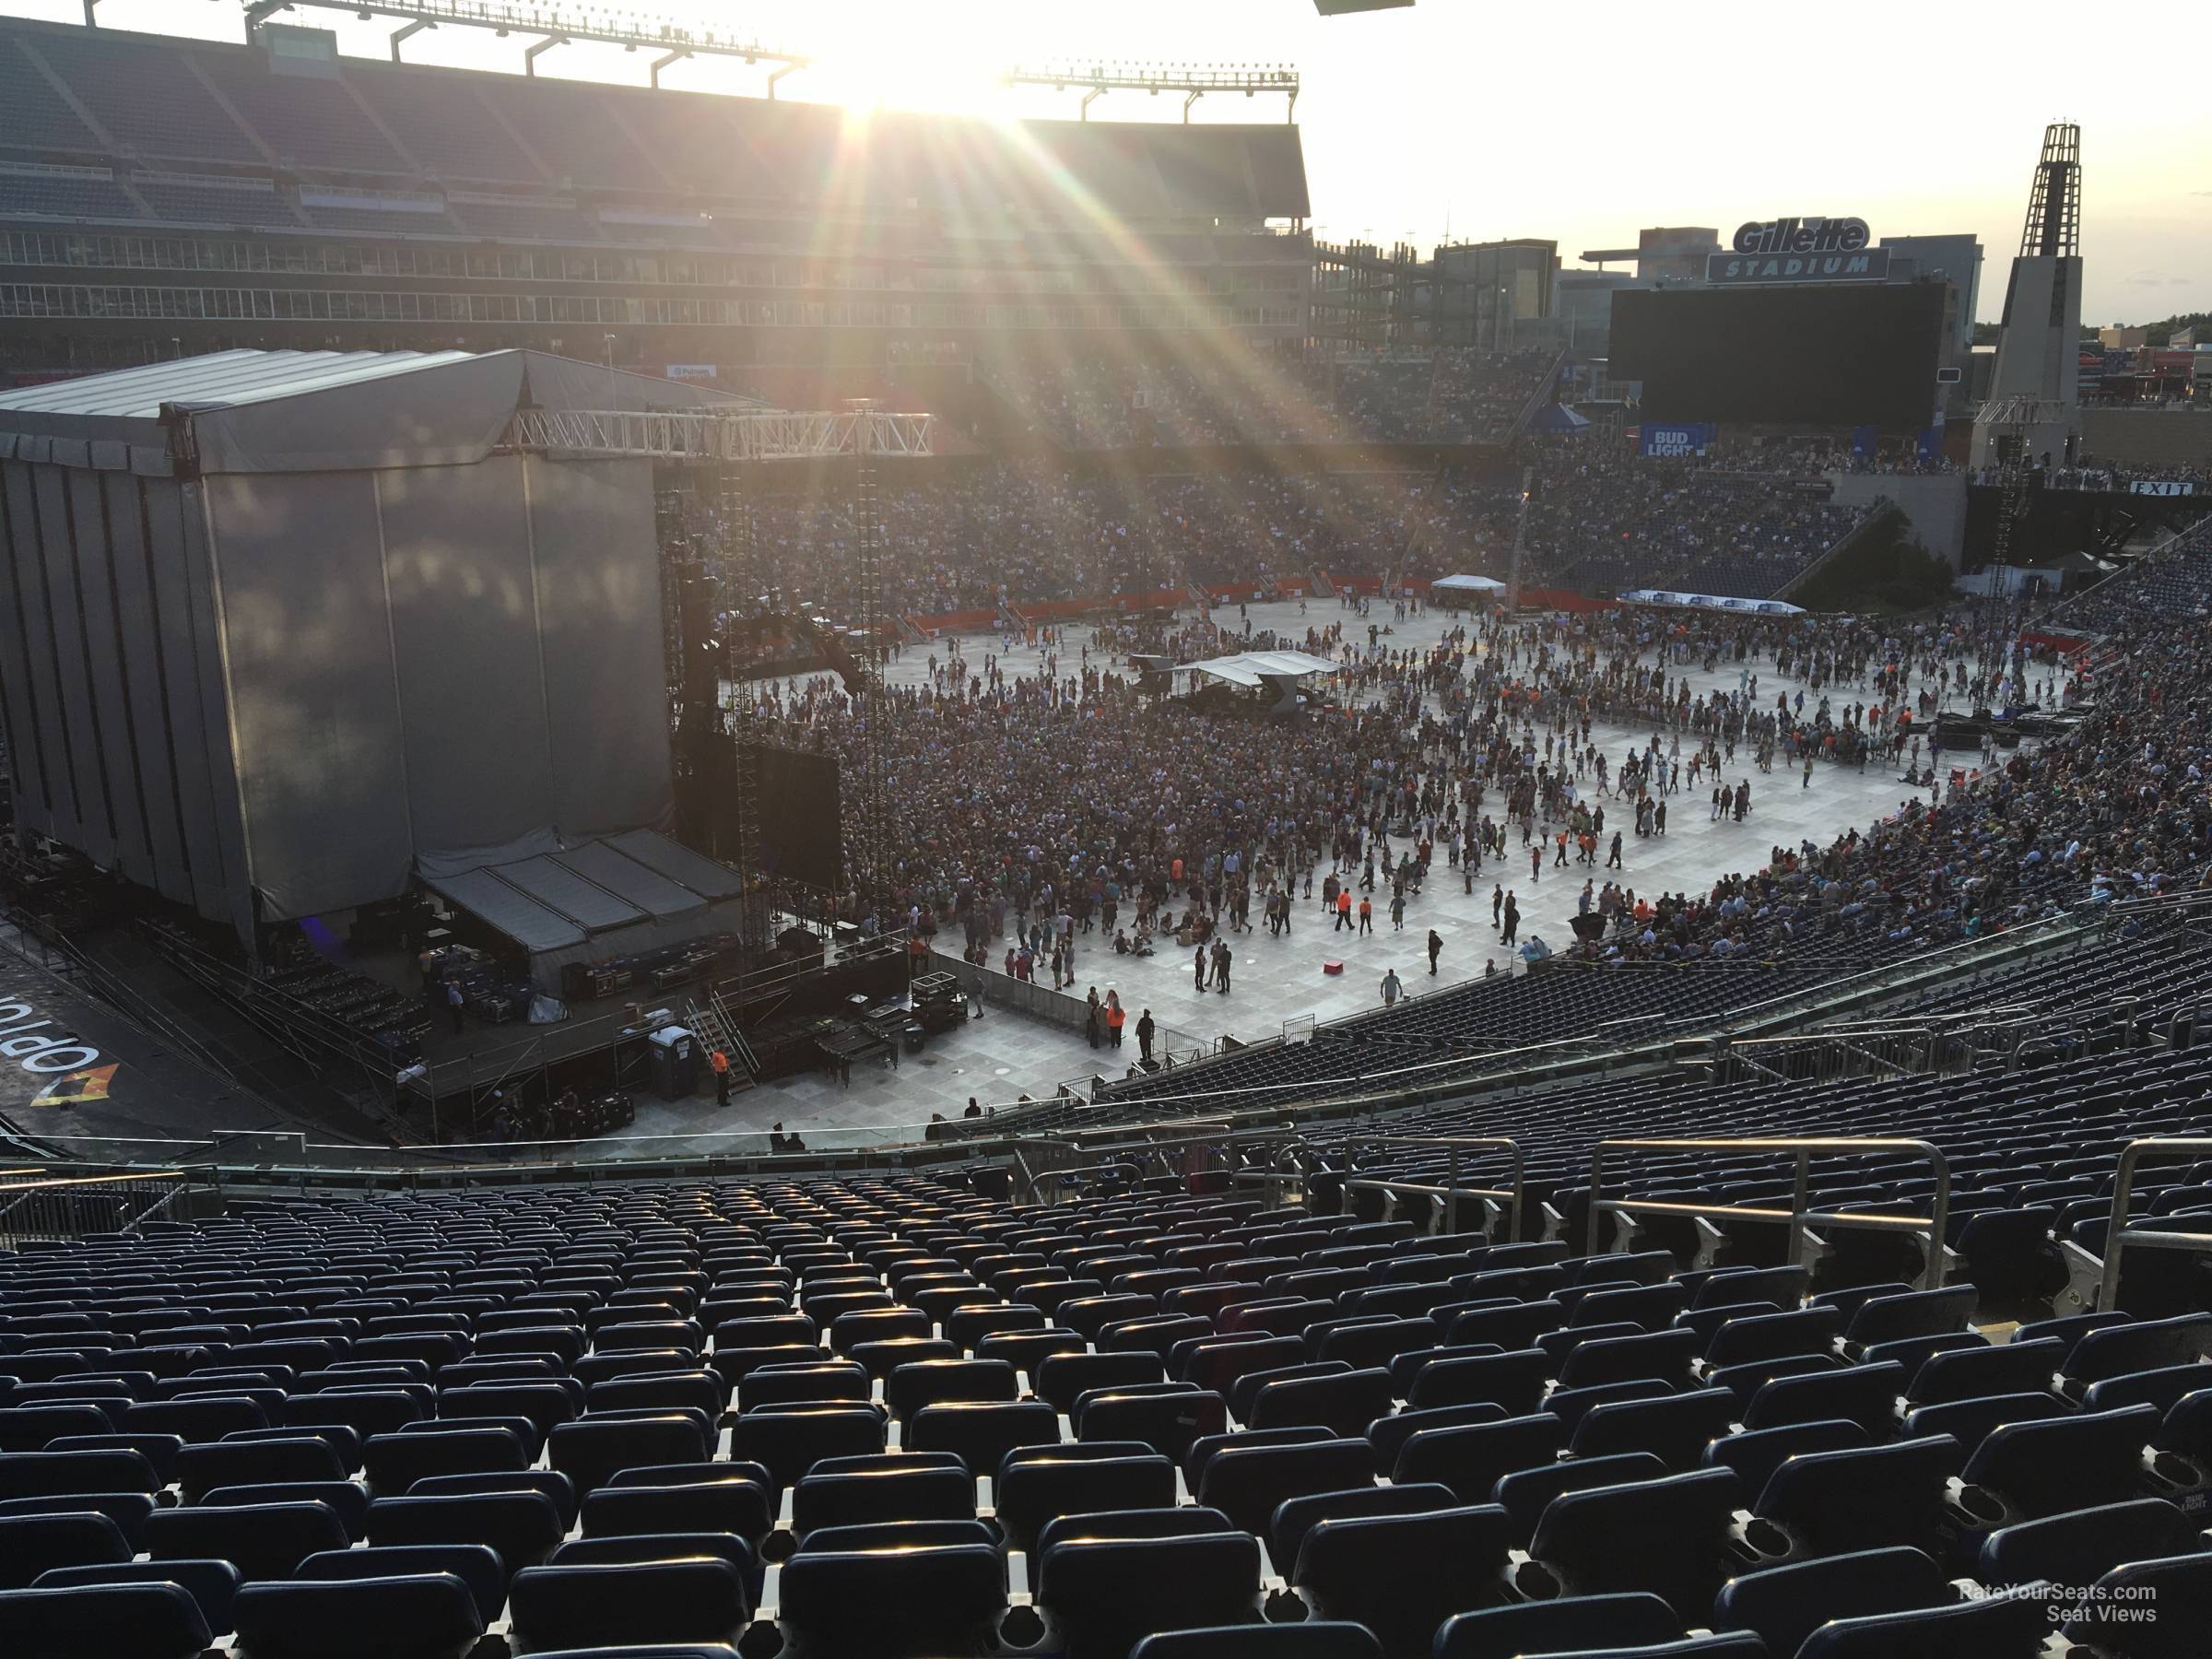 section 216, row 27 seat view  for concert - gillette stadium